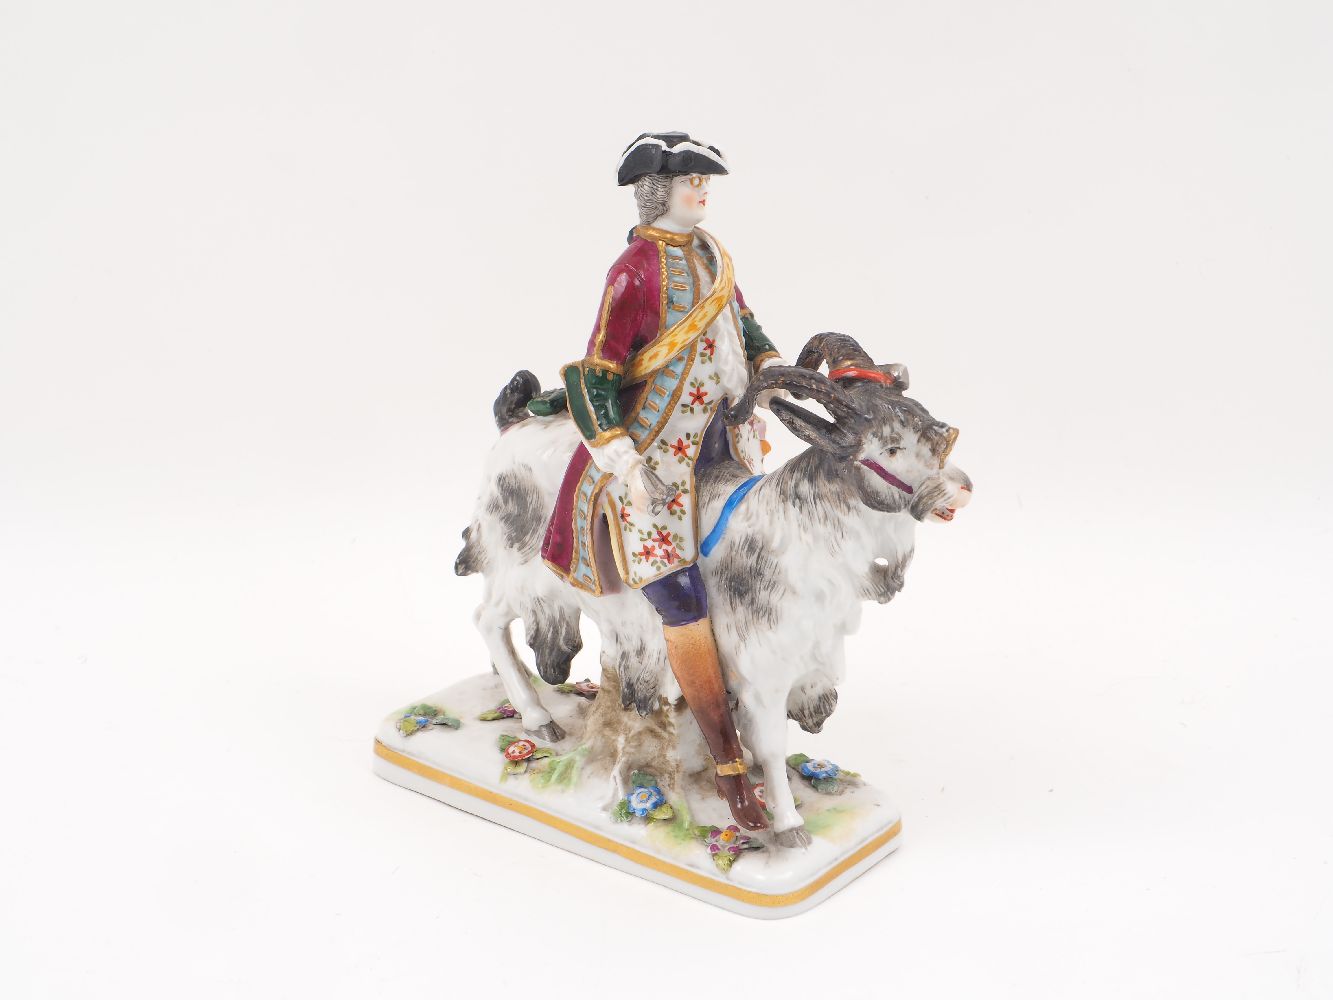 A Capodimonte porcelain figure, 19th century, designed a gentleman riding a goat, to a florally